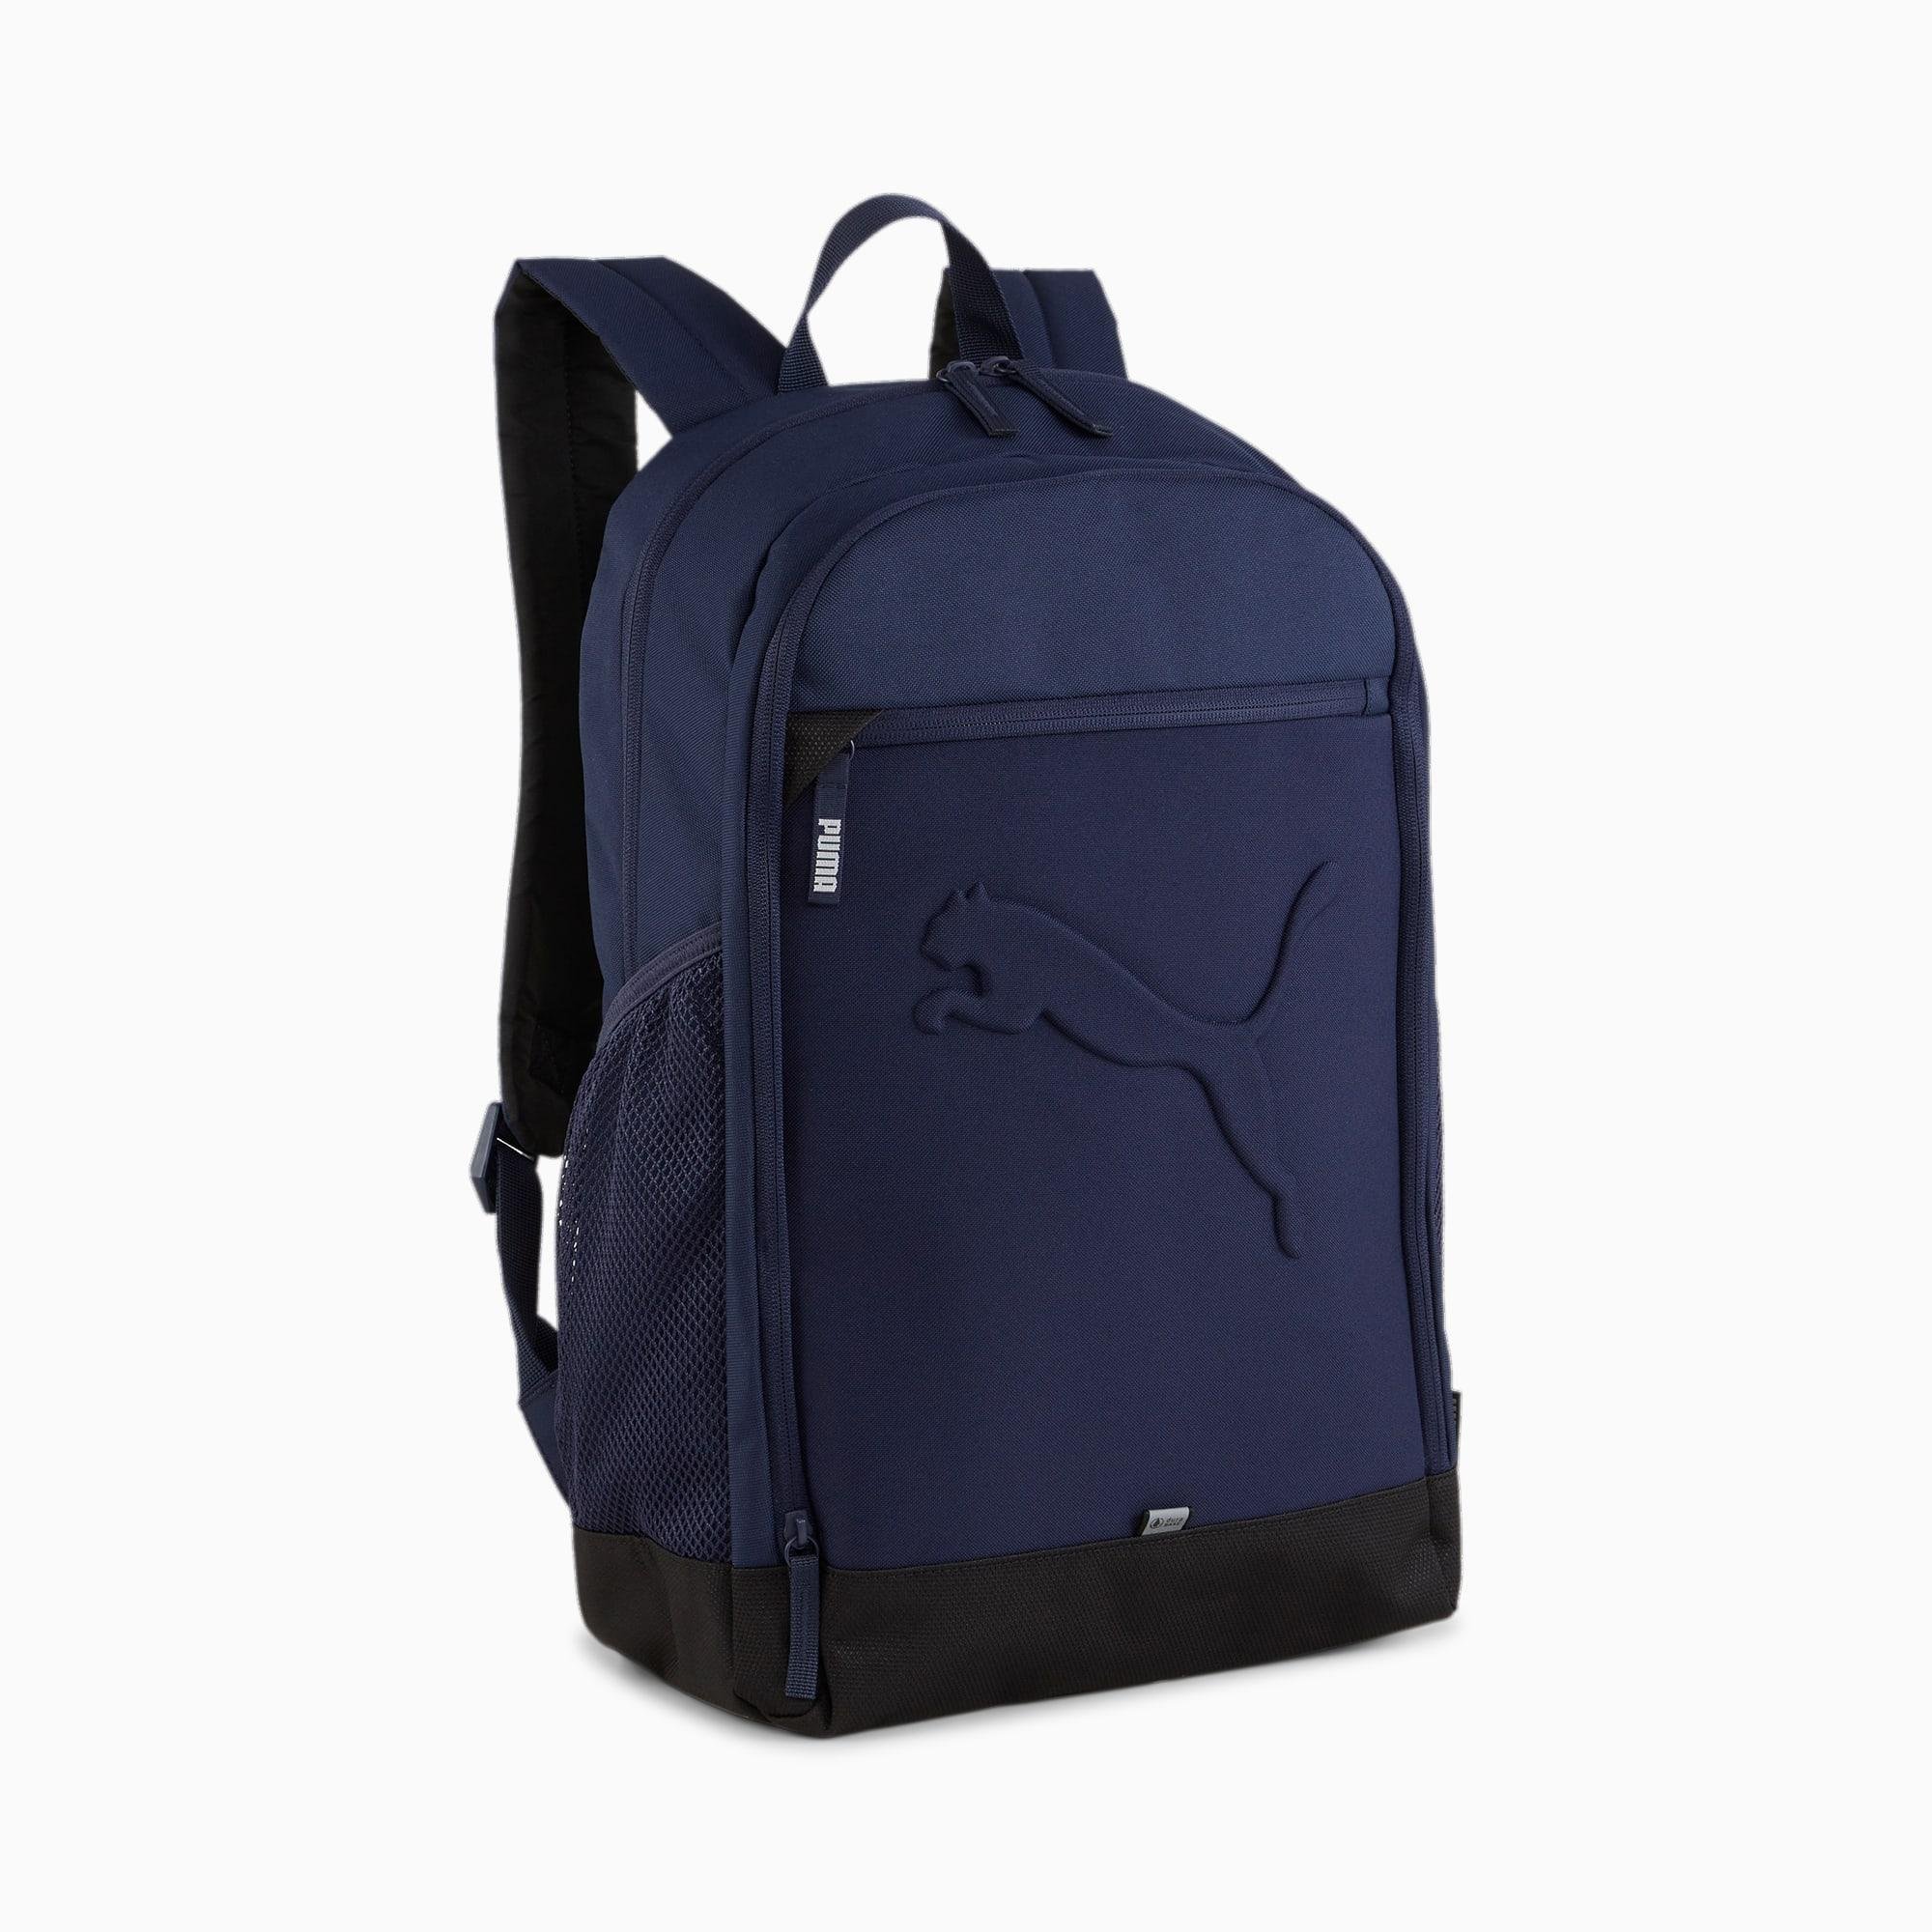 Buzz Backpack by PUMA